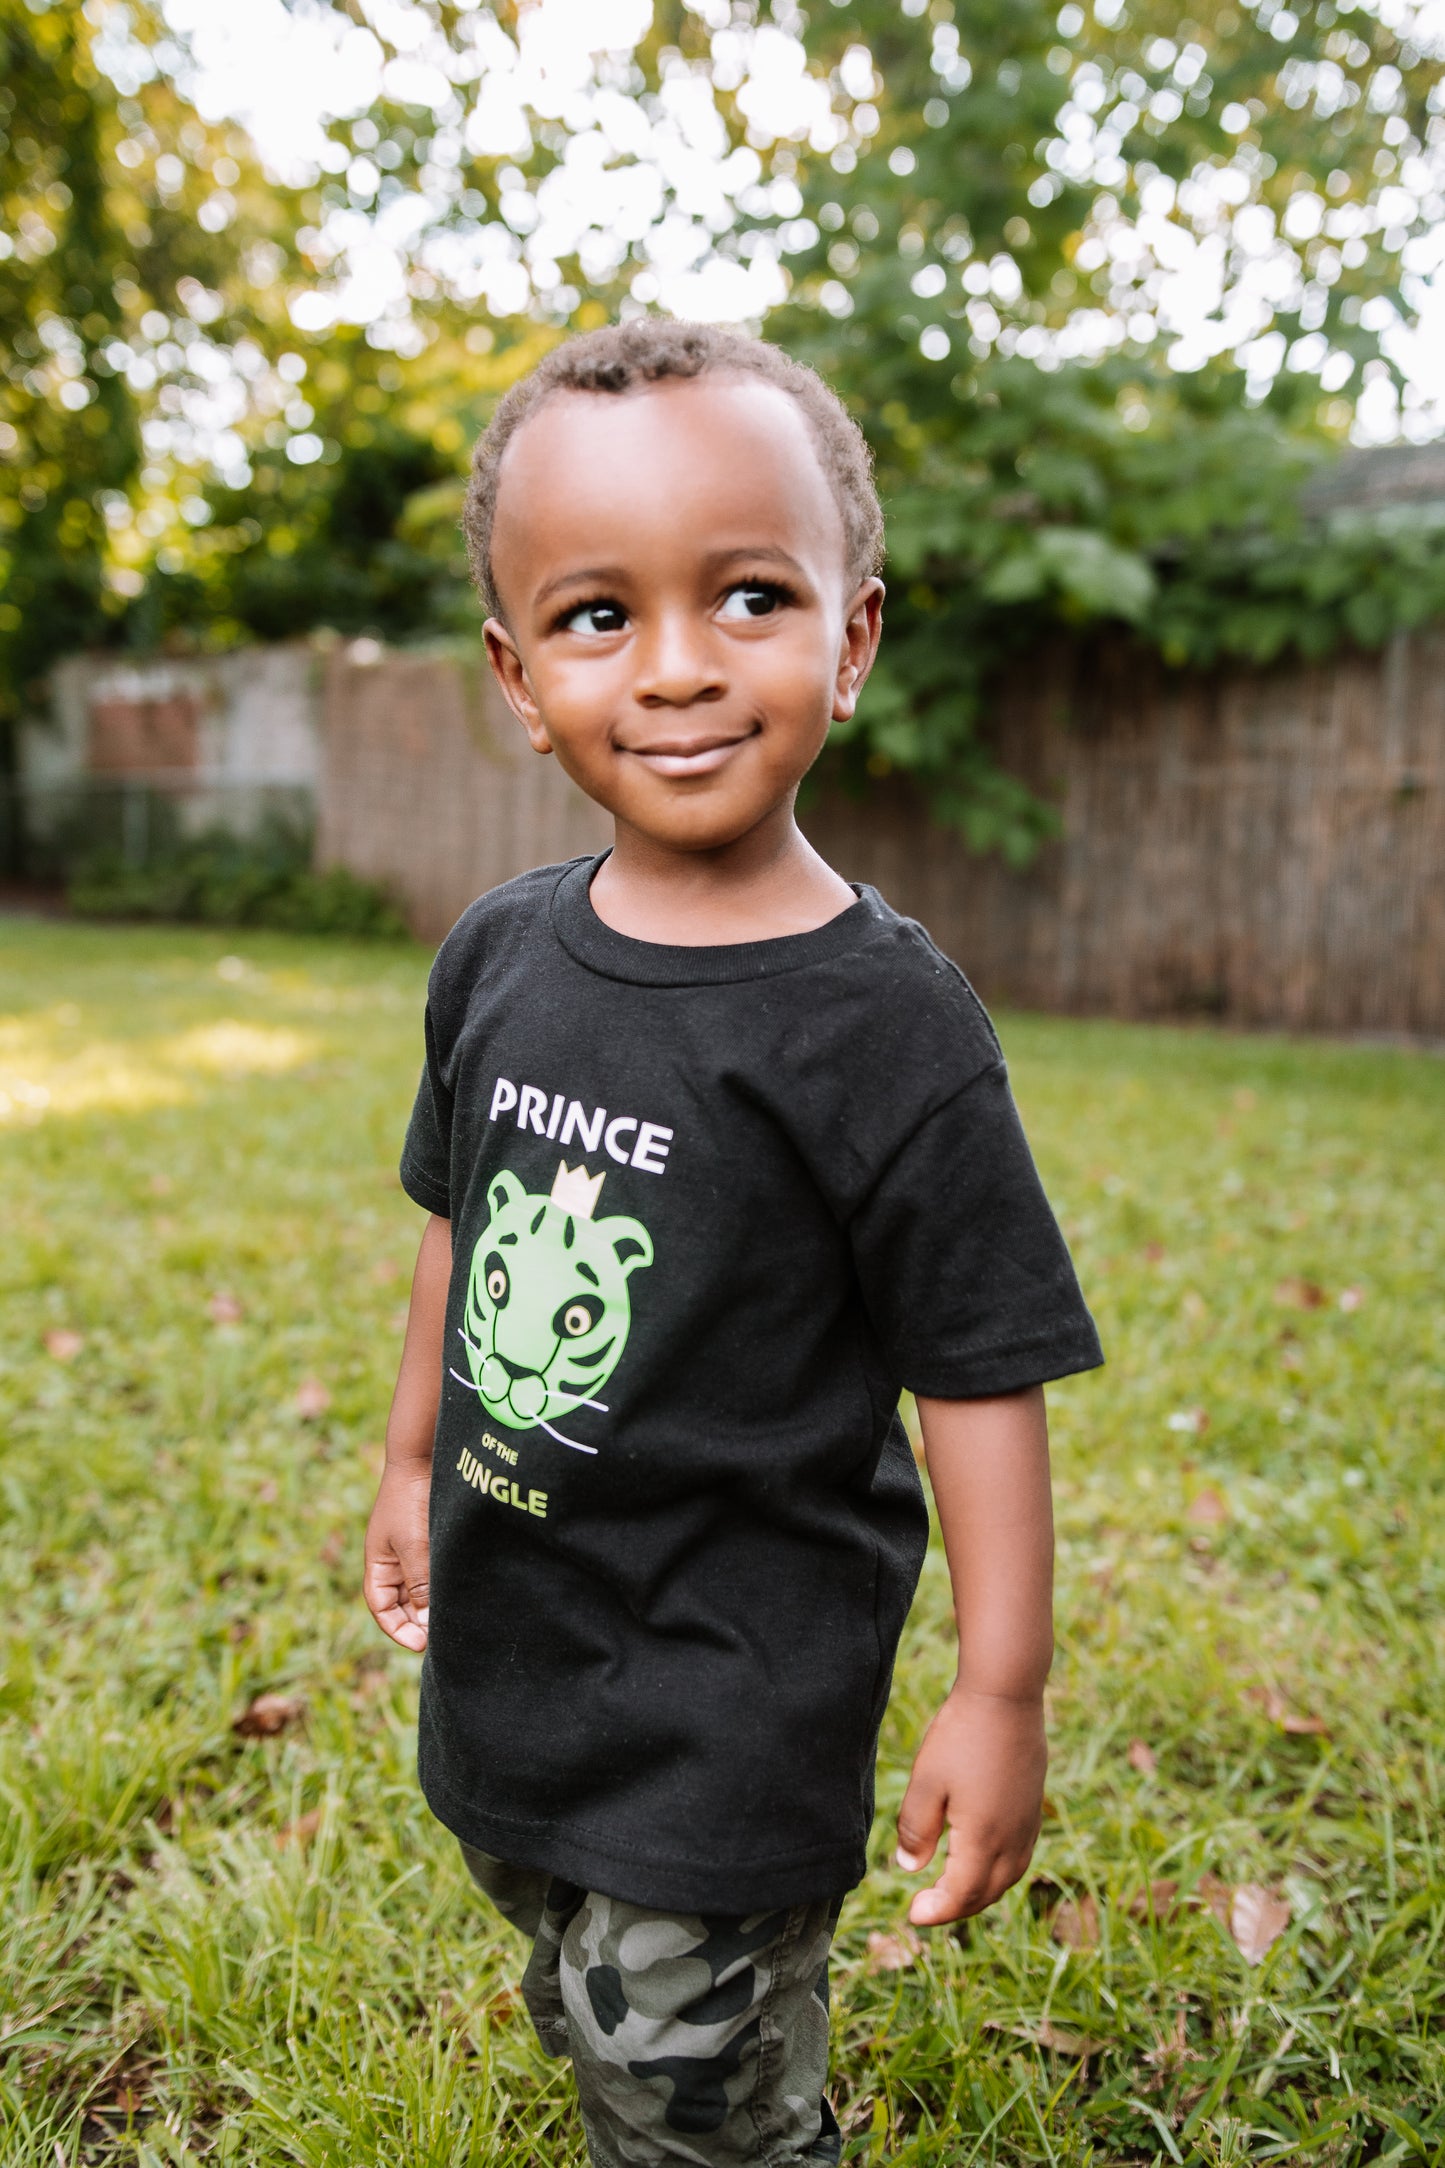 Prince of the jungle - premium crewneck black shirt for boys with a green glow in the dark tiger design